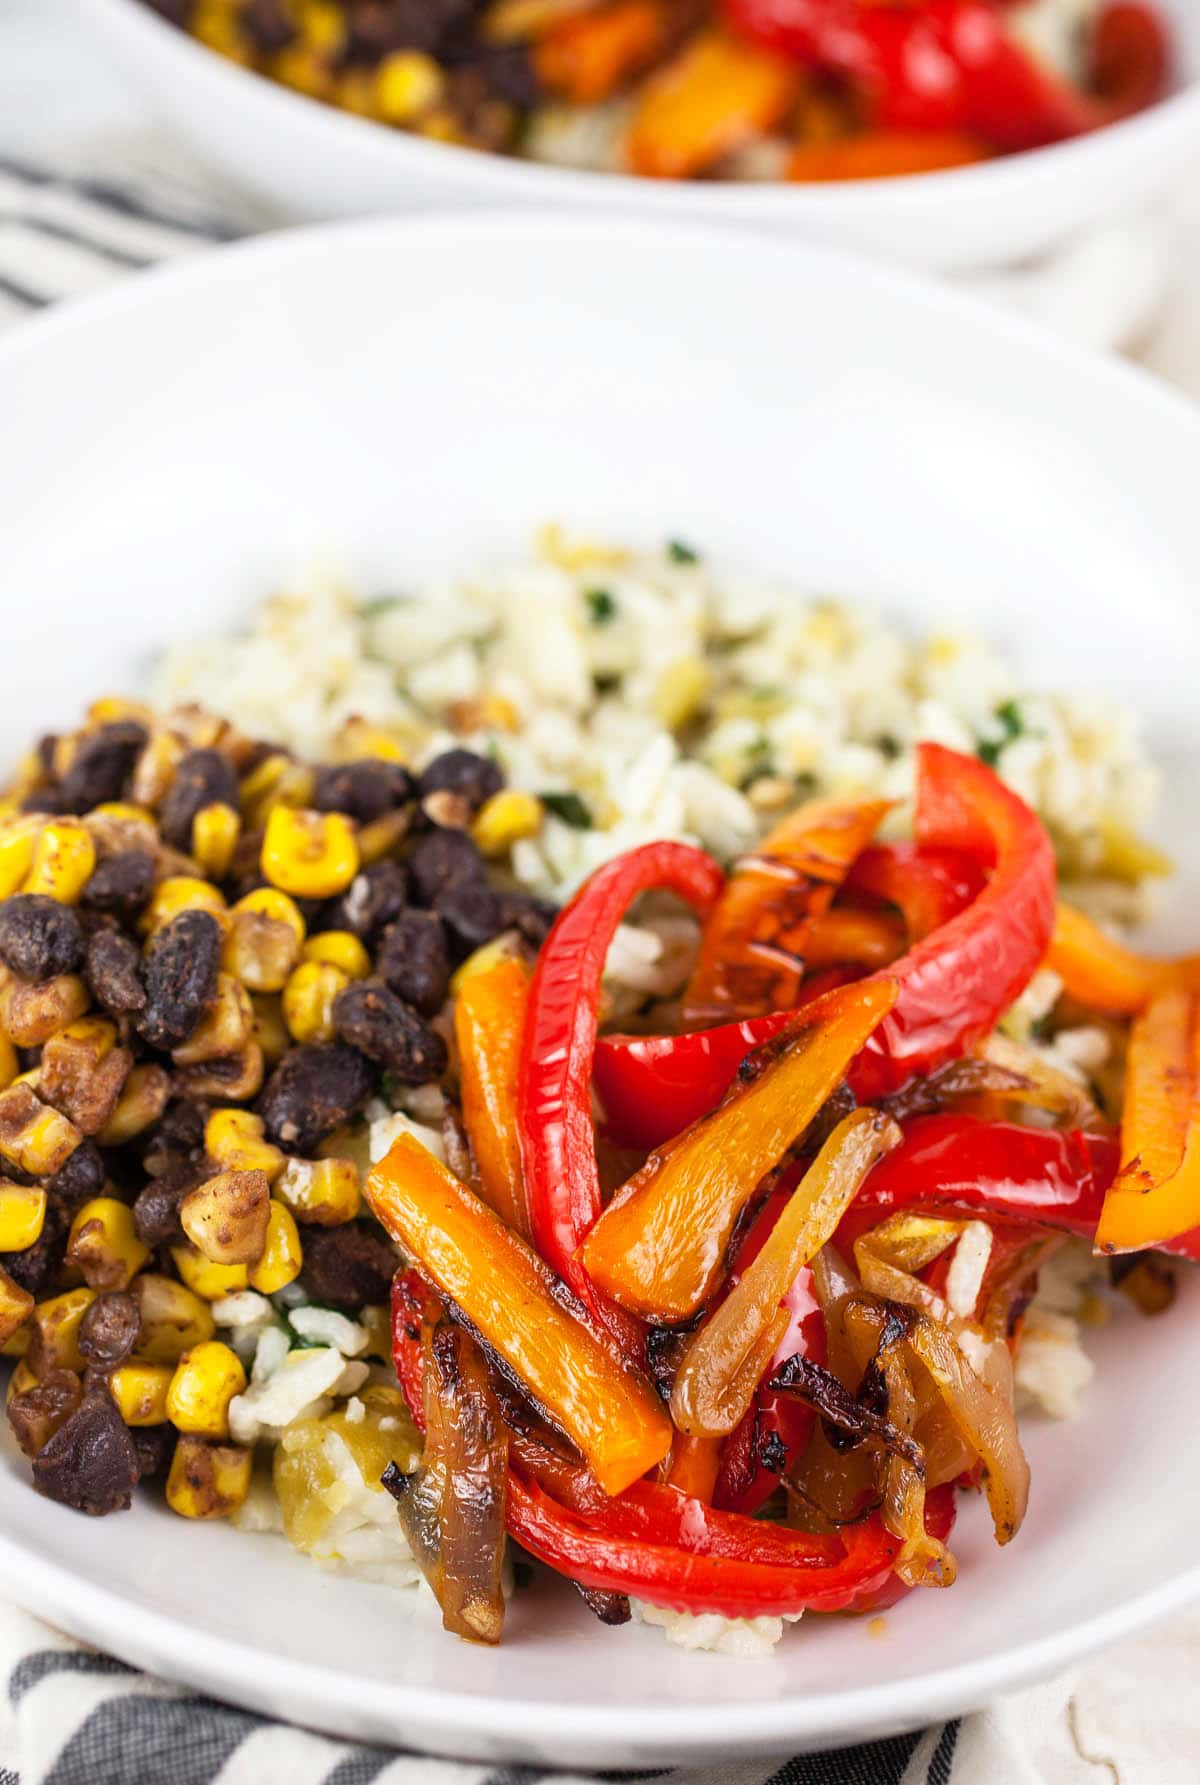 Seared onions, red and orange bell peppers, black beans, corn, and rice in white bowls.